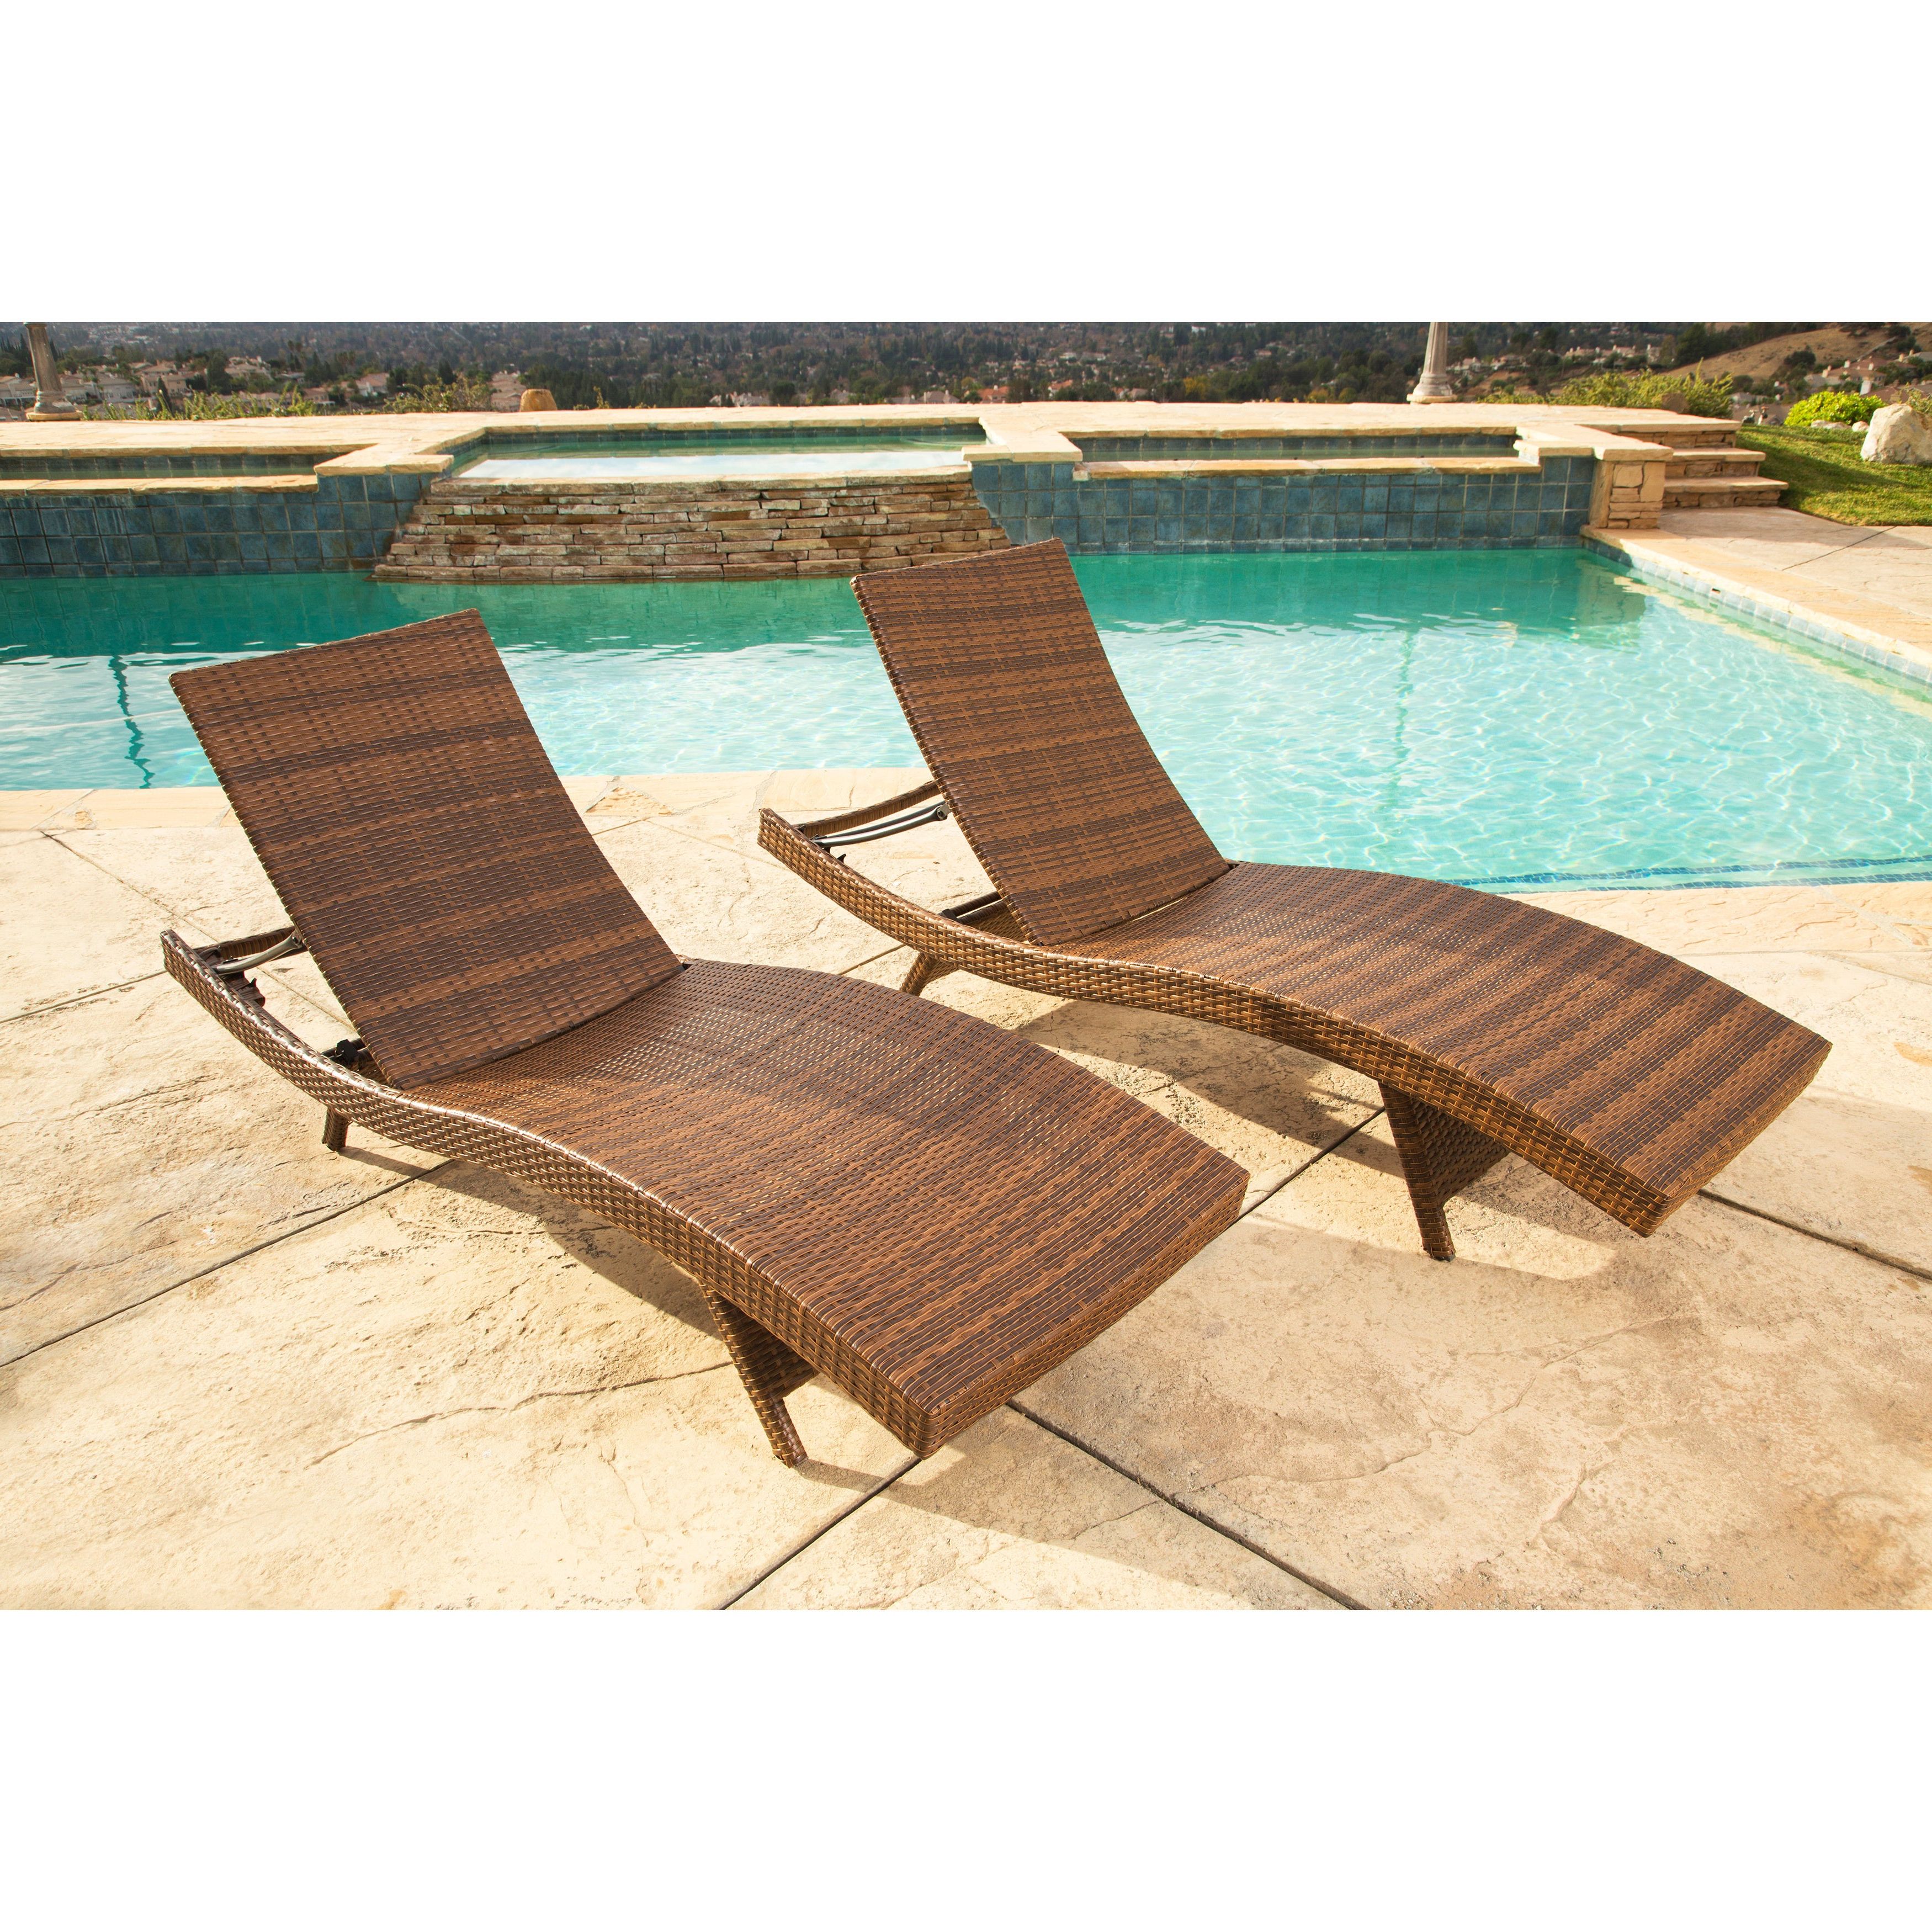 Outdoor Wicker Chaise Lounge Chairs With Regard To Most Popular Abbyson Palermo Outdoor Brown Wicker Chaise Lounge (set Of 2) (View 1 of 25)